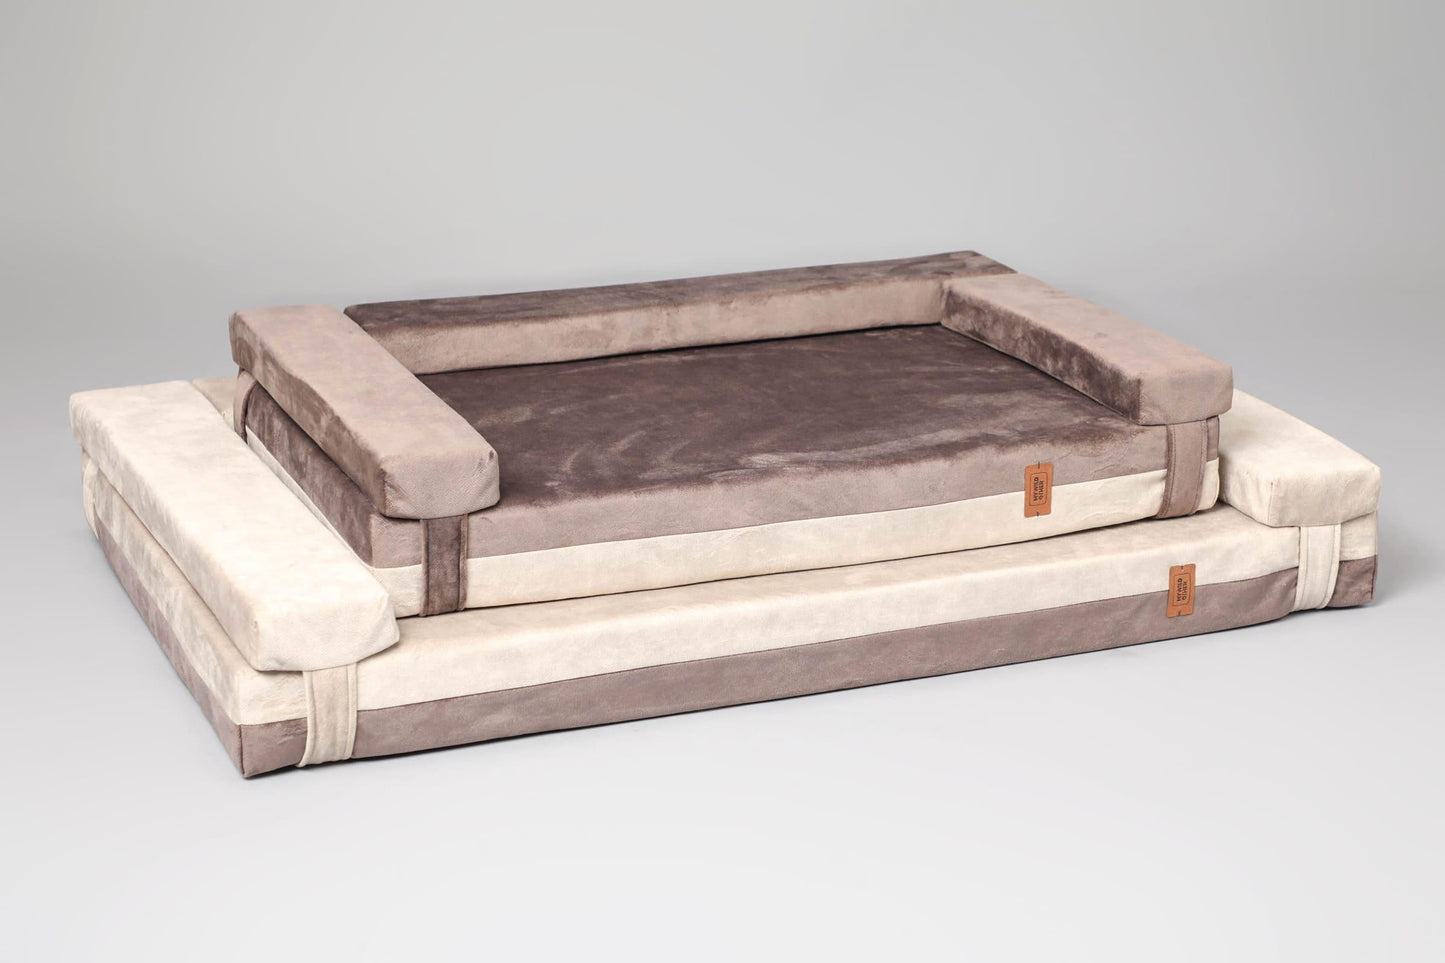 2-sided transformer dog bed. BEIGE+TAUPE - premium dog goods handmade in Europe by My Wild Other